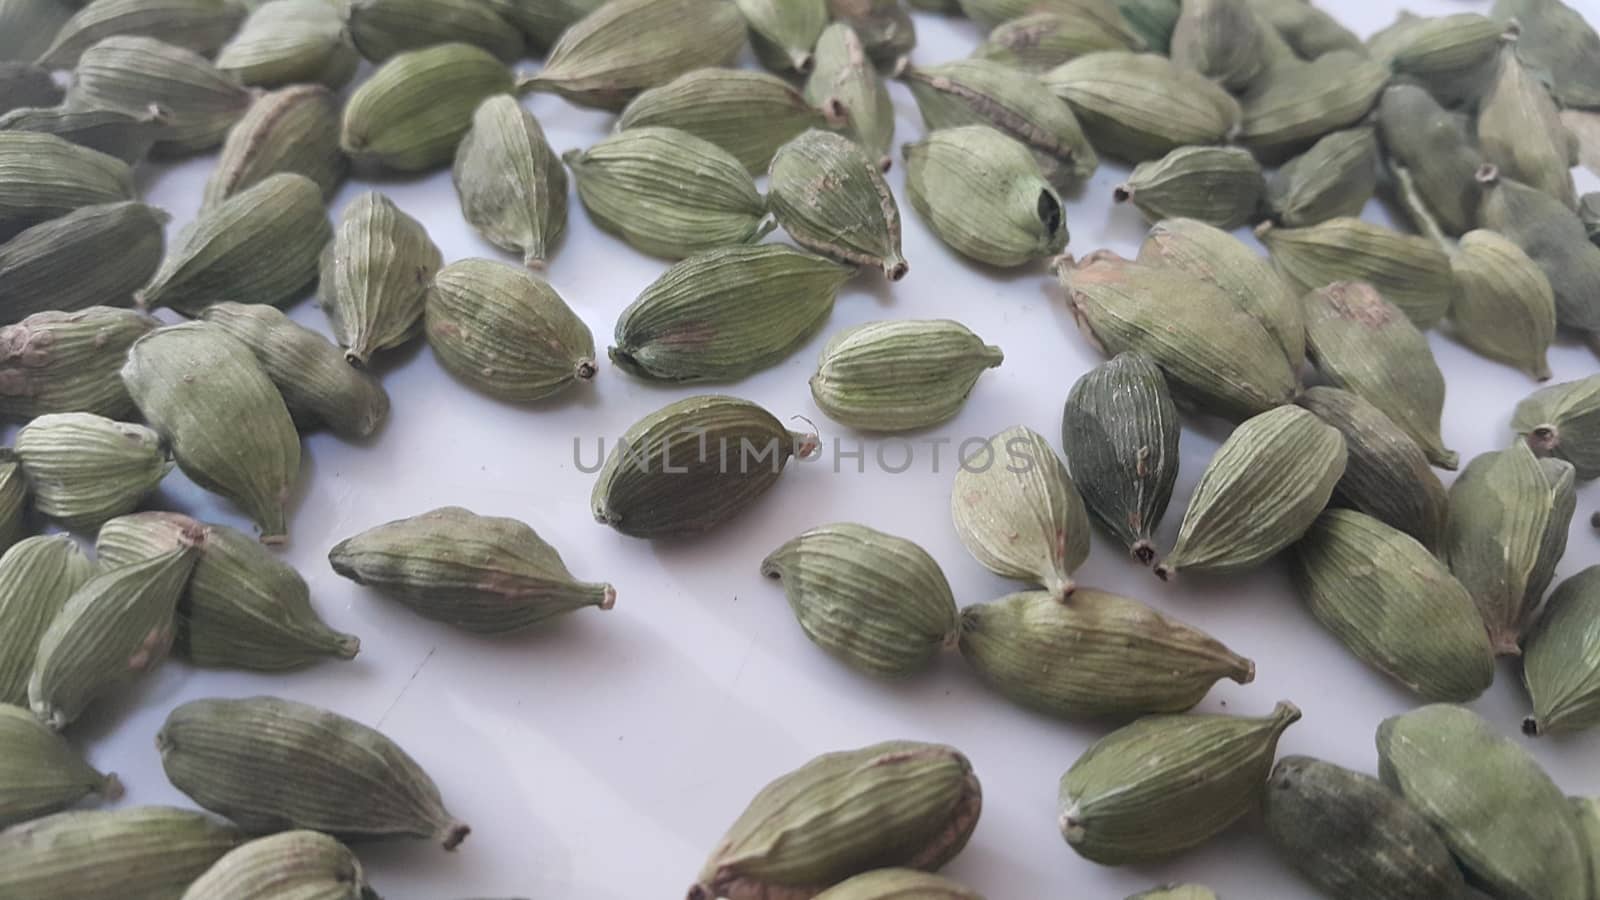 Closeup top view of dried green Elettaria cardamomum fruits with seeds, cardamom spice scattered on white background